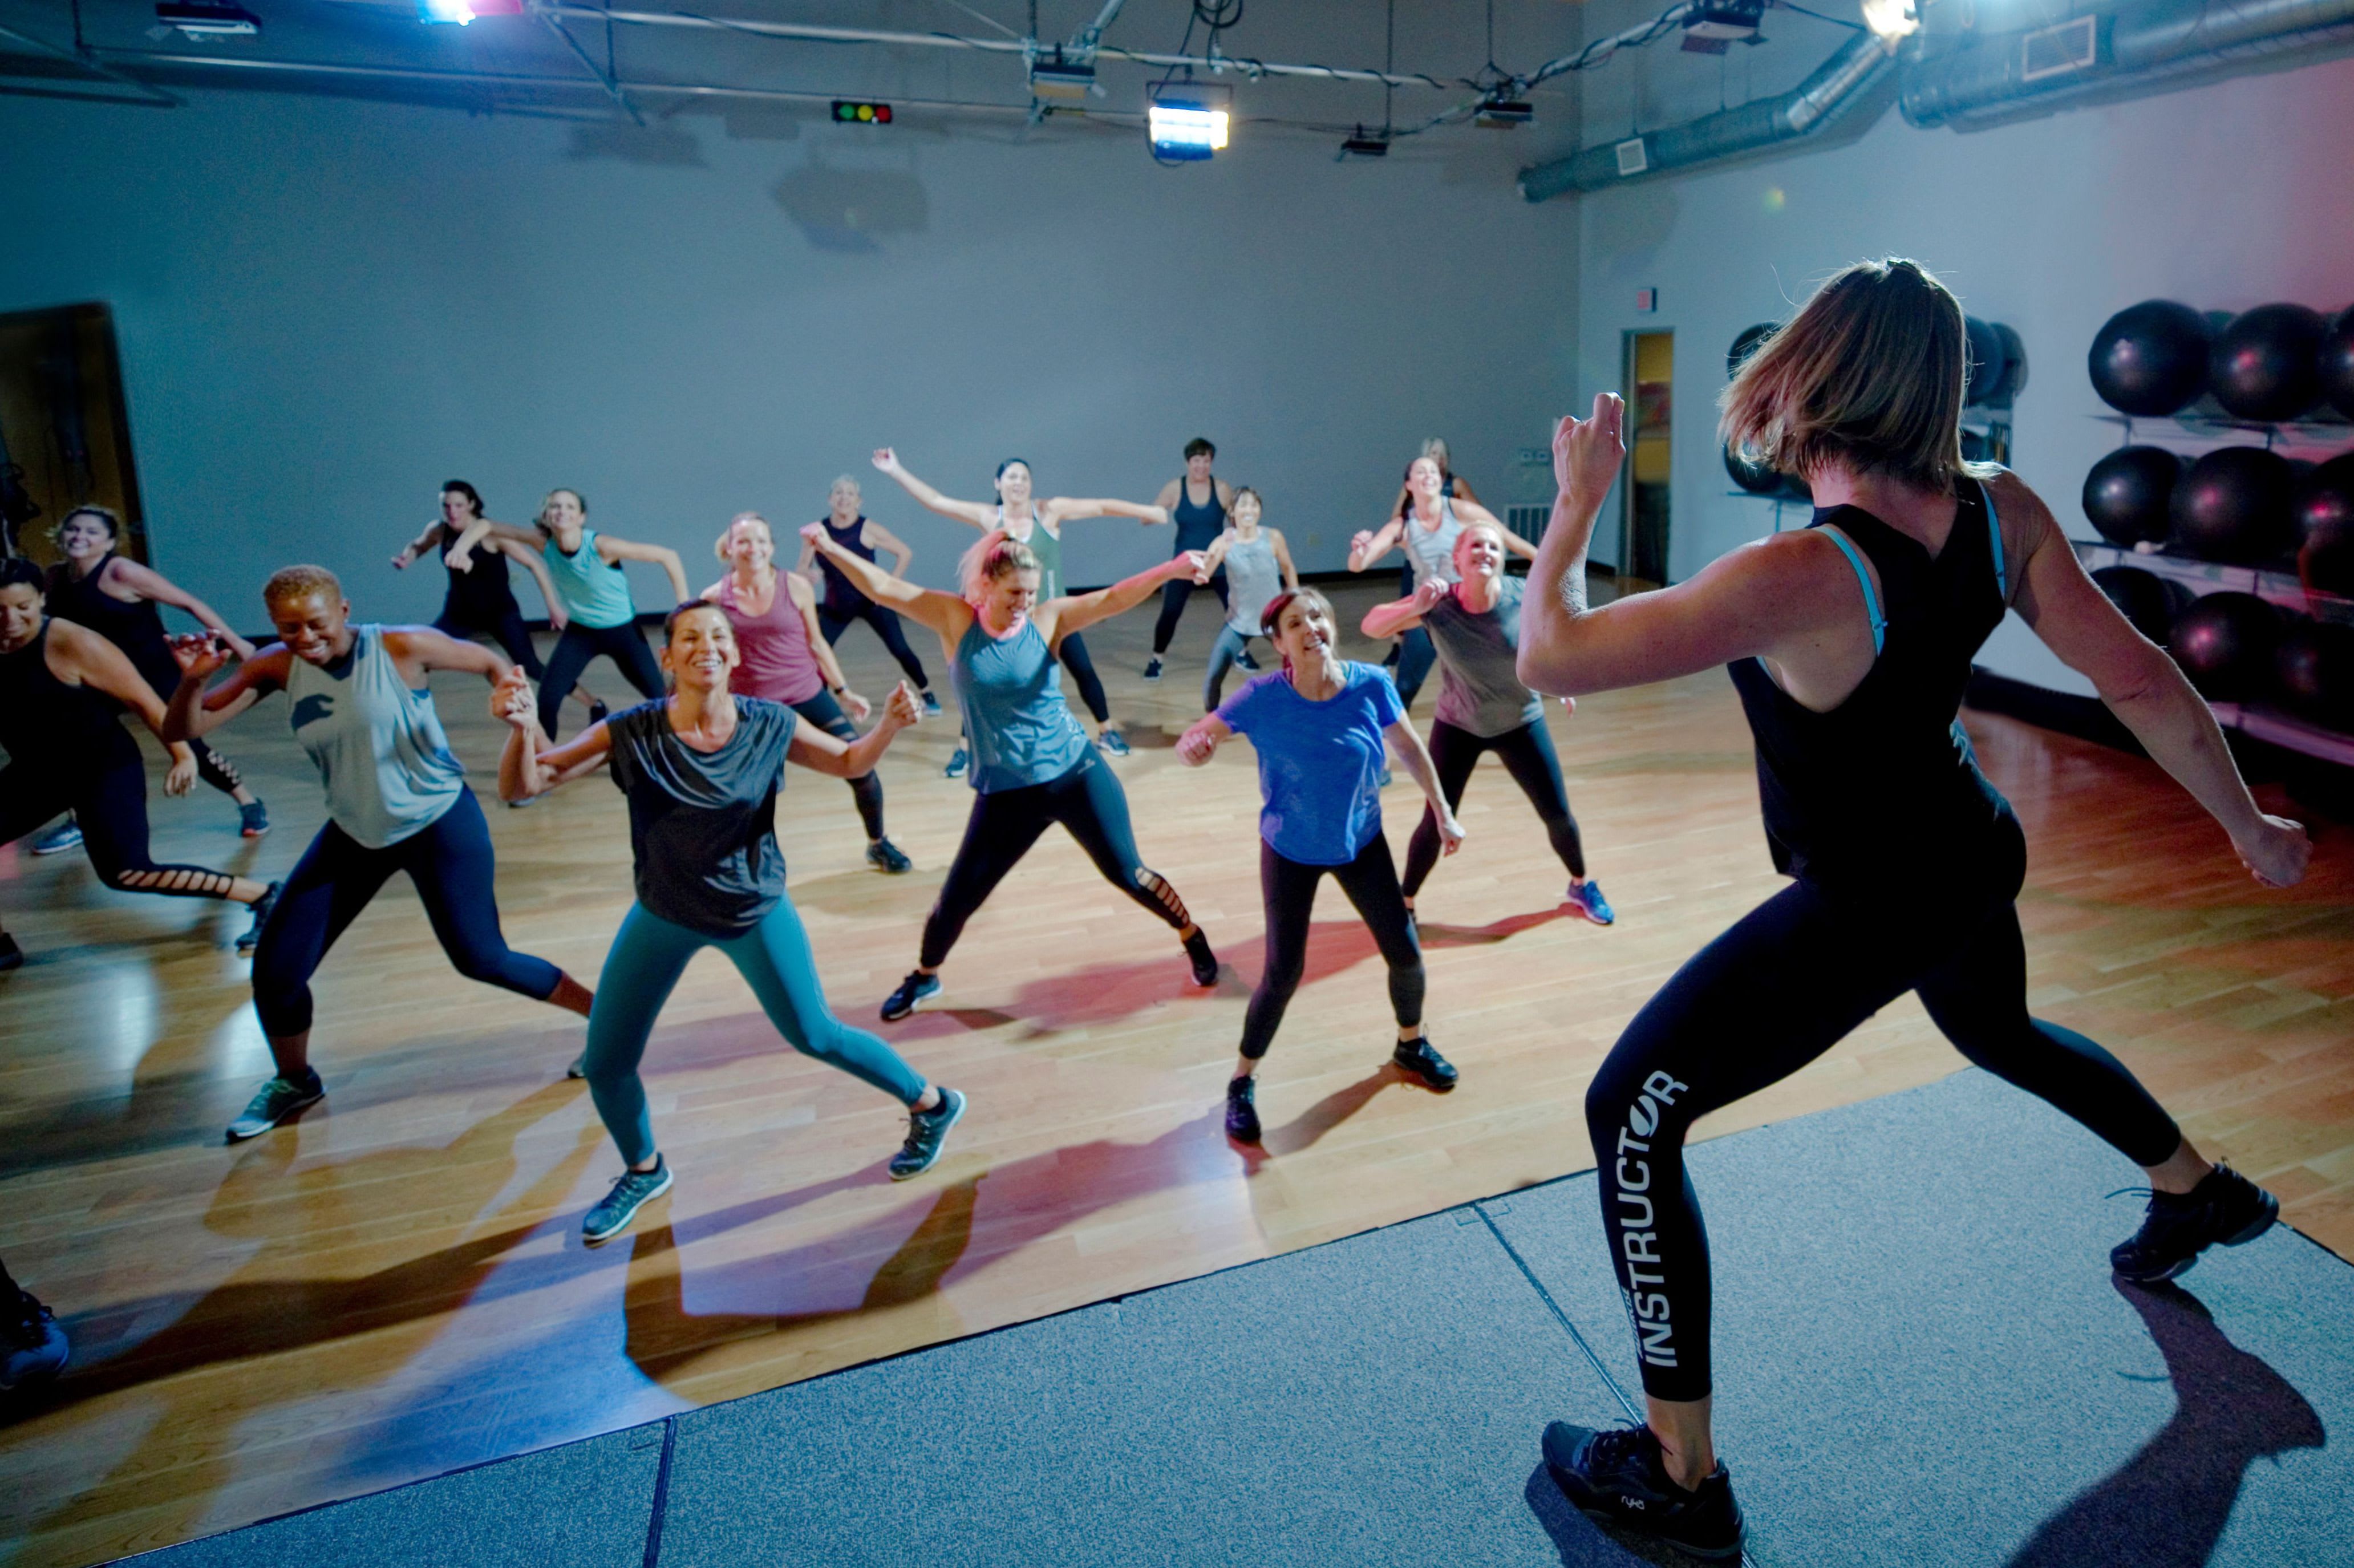 Federal Way Jazzercise Fitness: Read Reviews and Book Classes on ClassPass